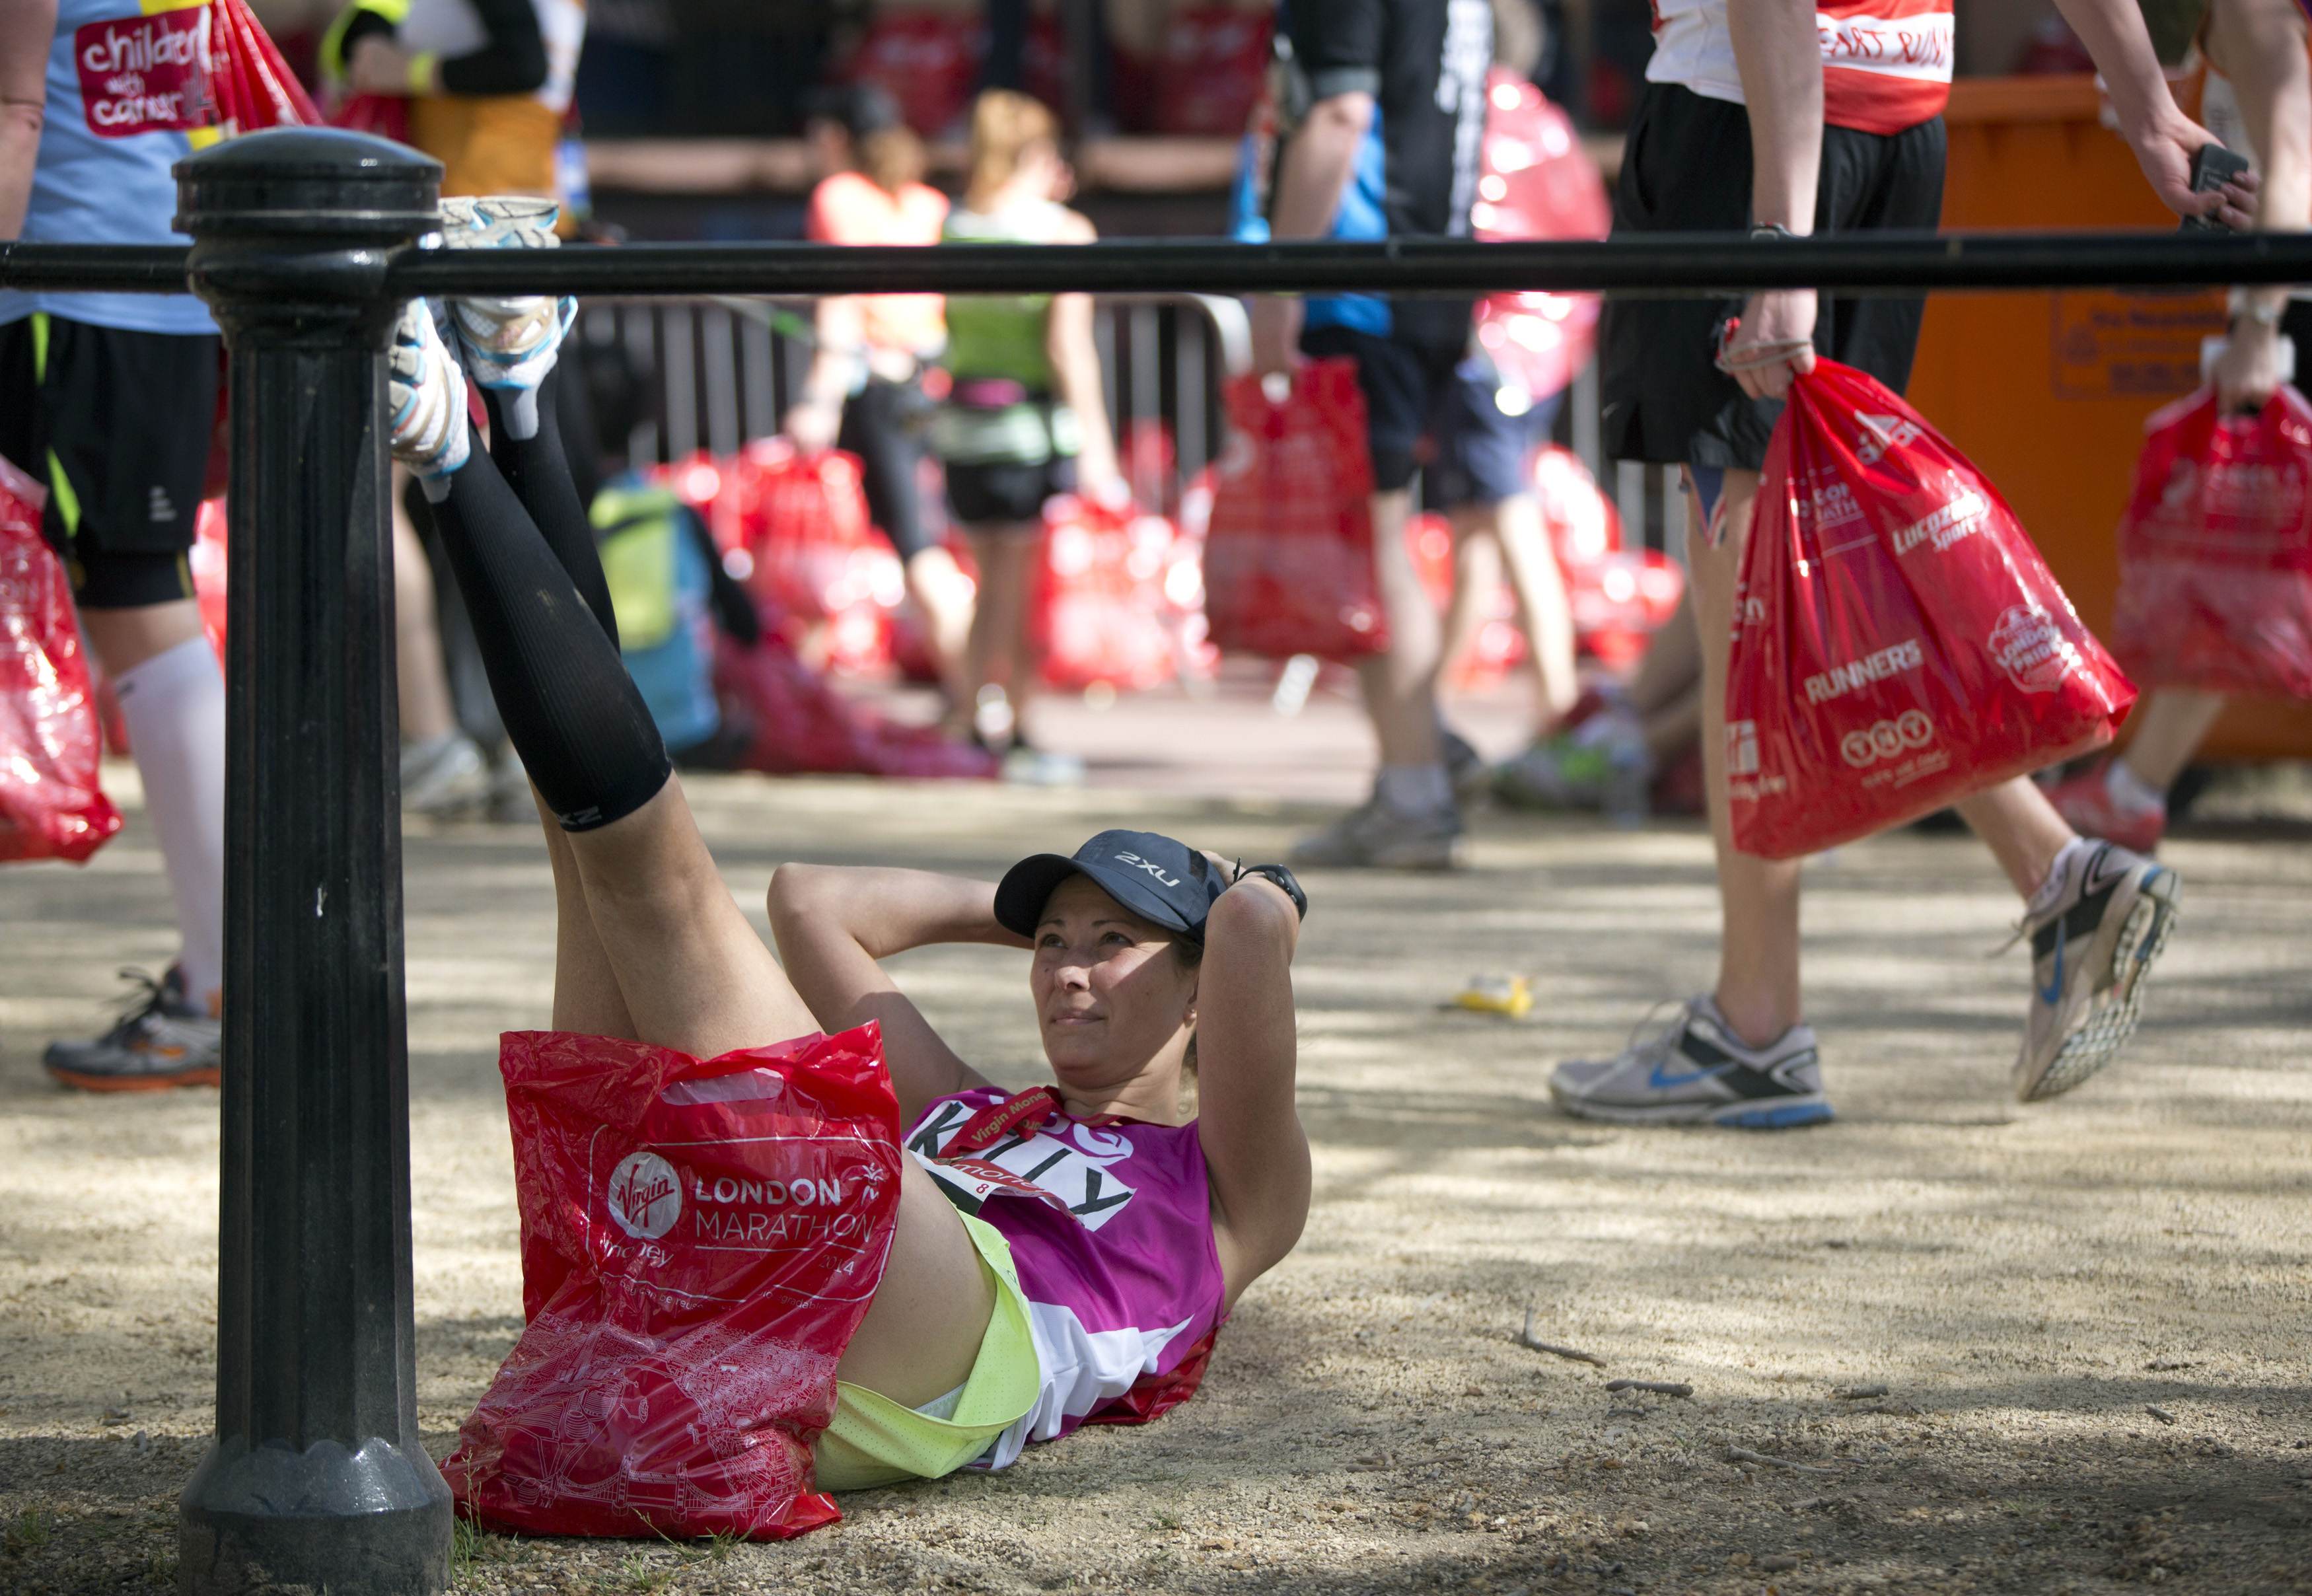 A participant stretches her legs after completing the London Marathon April 13, 2014. REUTERS/Neil Hall (BRITAIN - Tags: SPORT ATHLETICS) Picture Supplied by Action Images